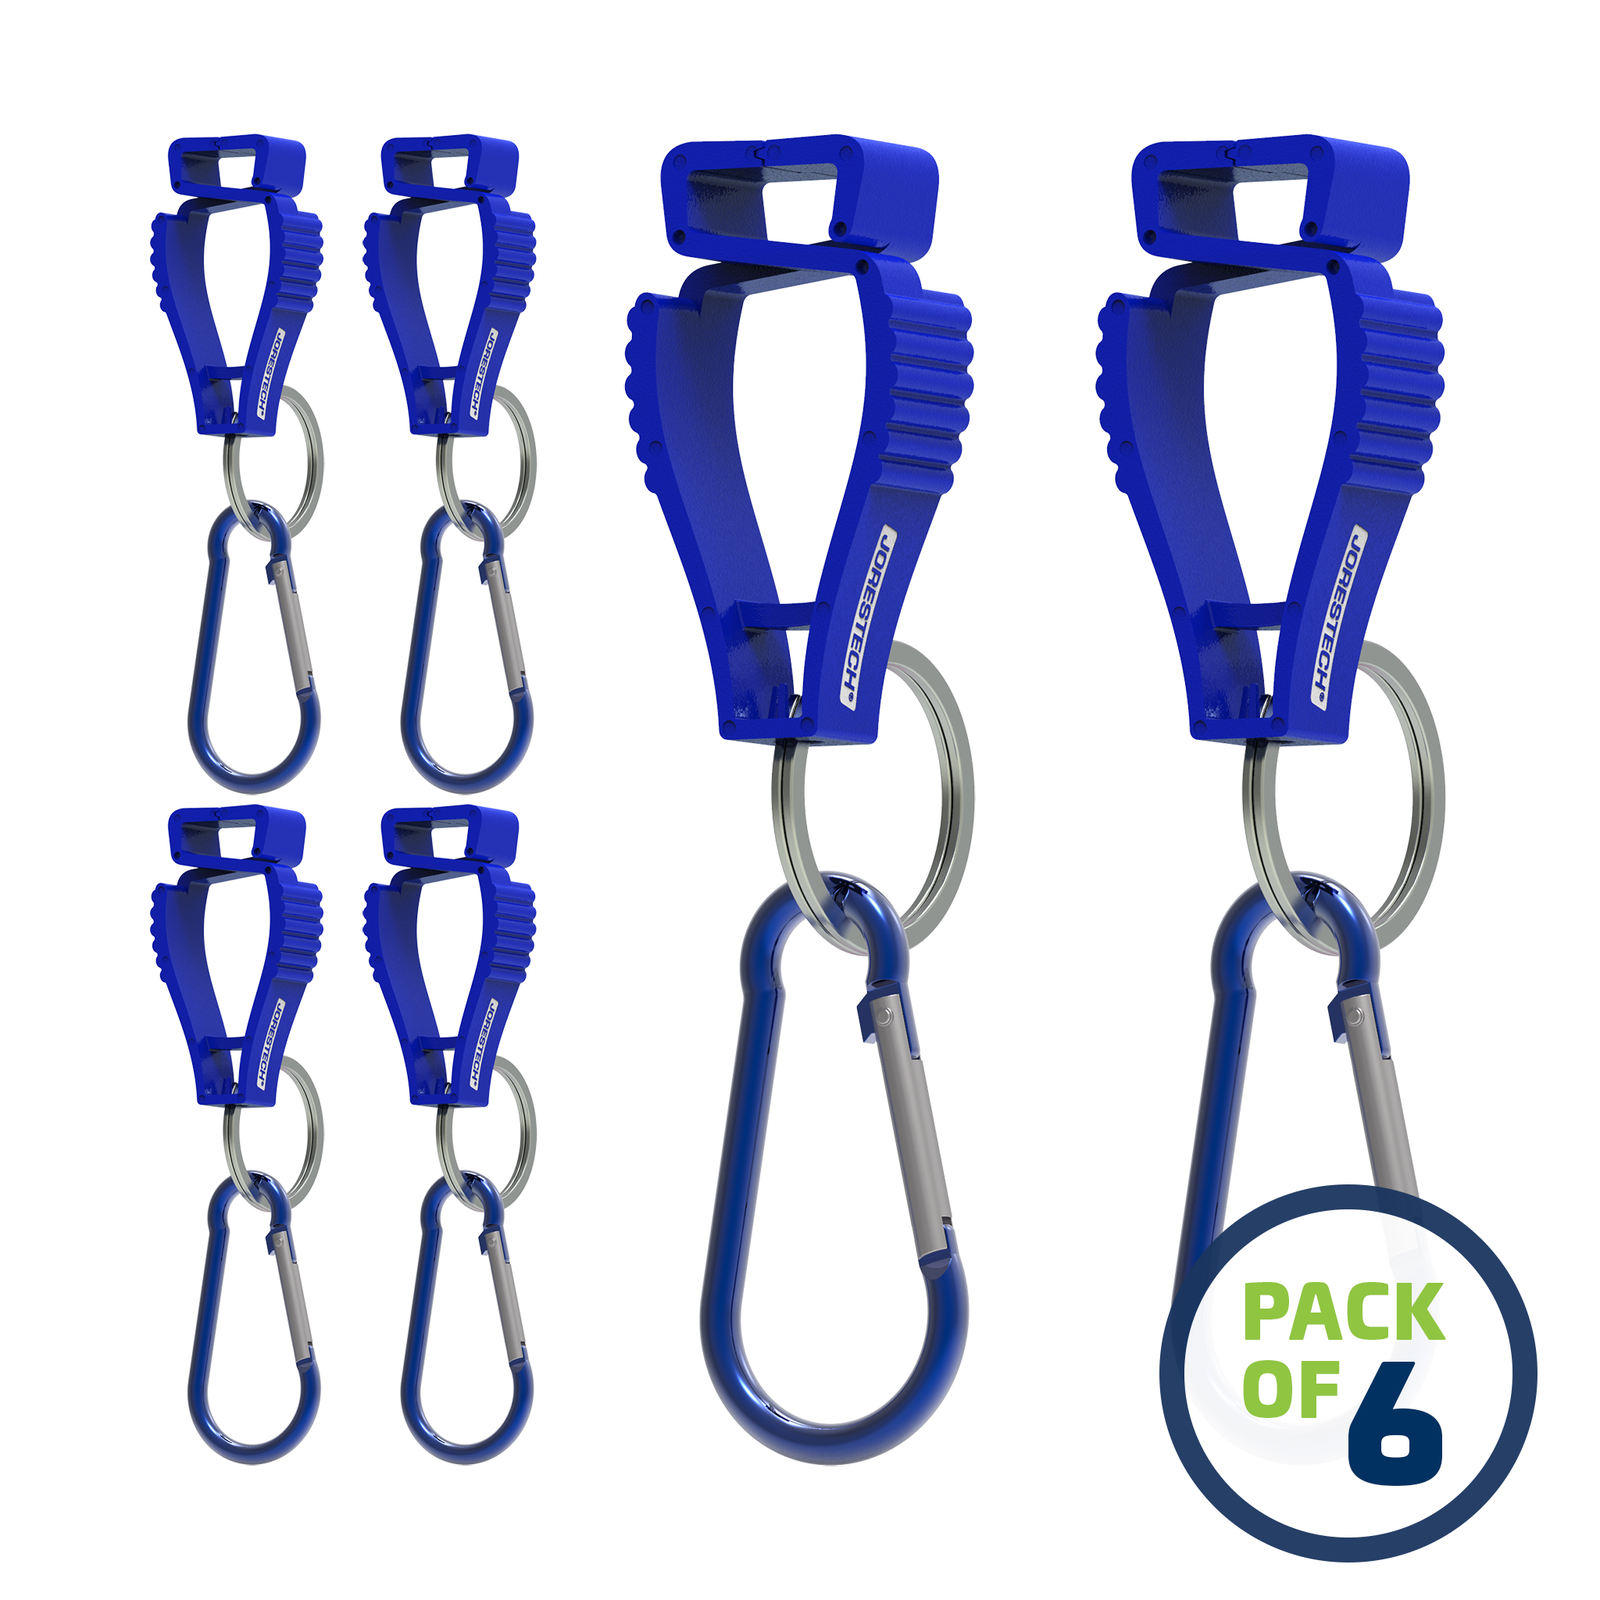 Pack of 6 Blue JORESTECH glove clip safety holders with carabiner